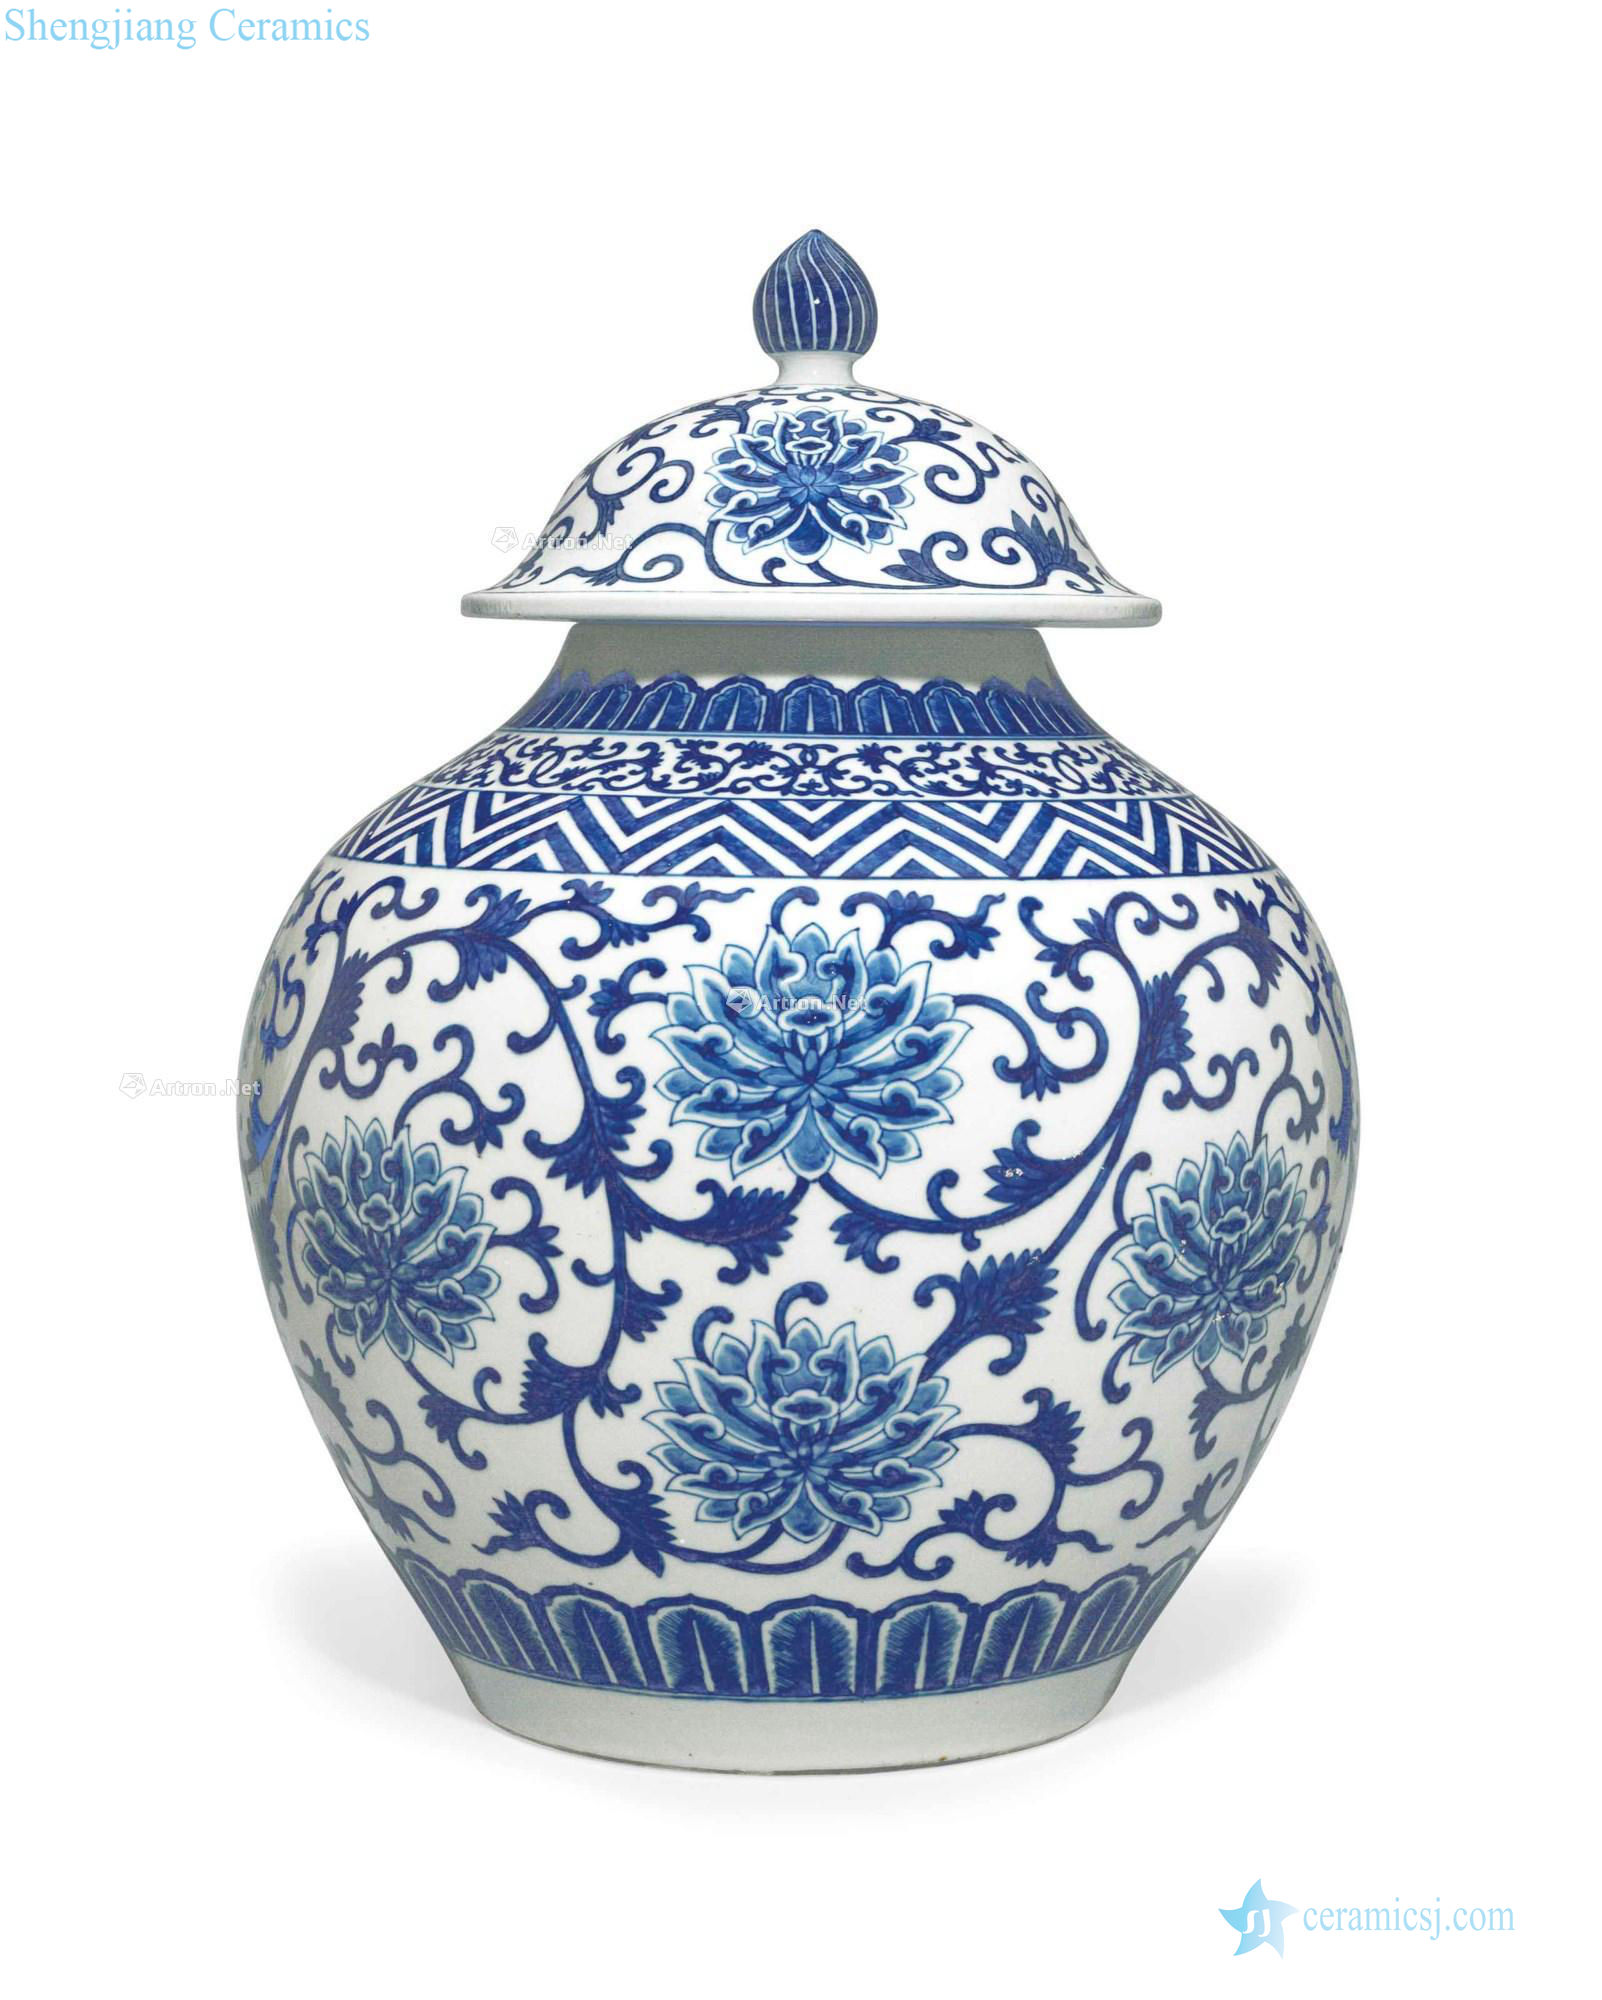 In the qing dynasty, in the 19th century A LARGE BLUE AND WHITE GLOBULAR LOTUS JAR AND A COVER